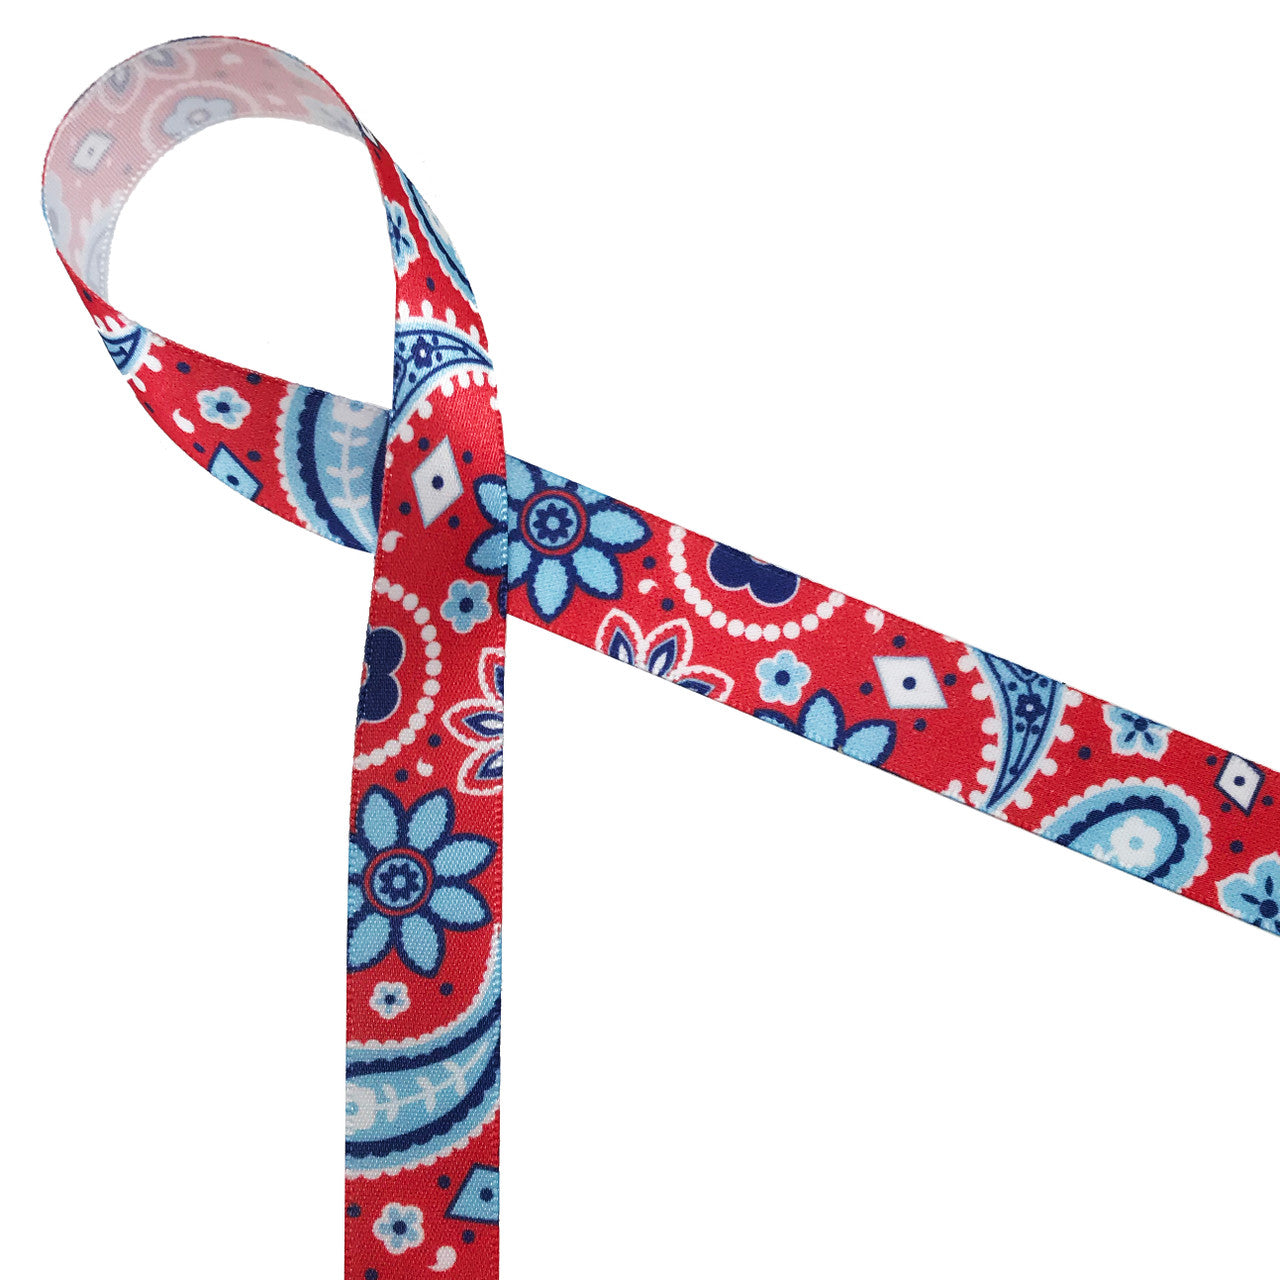 Patriotic paisley in red white and blue makes such a pretty statement on any  USA themed party! Printed on 5/8" white single face satin to tie a lovely soft bow!